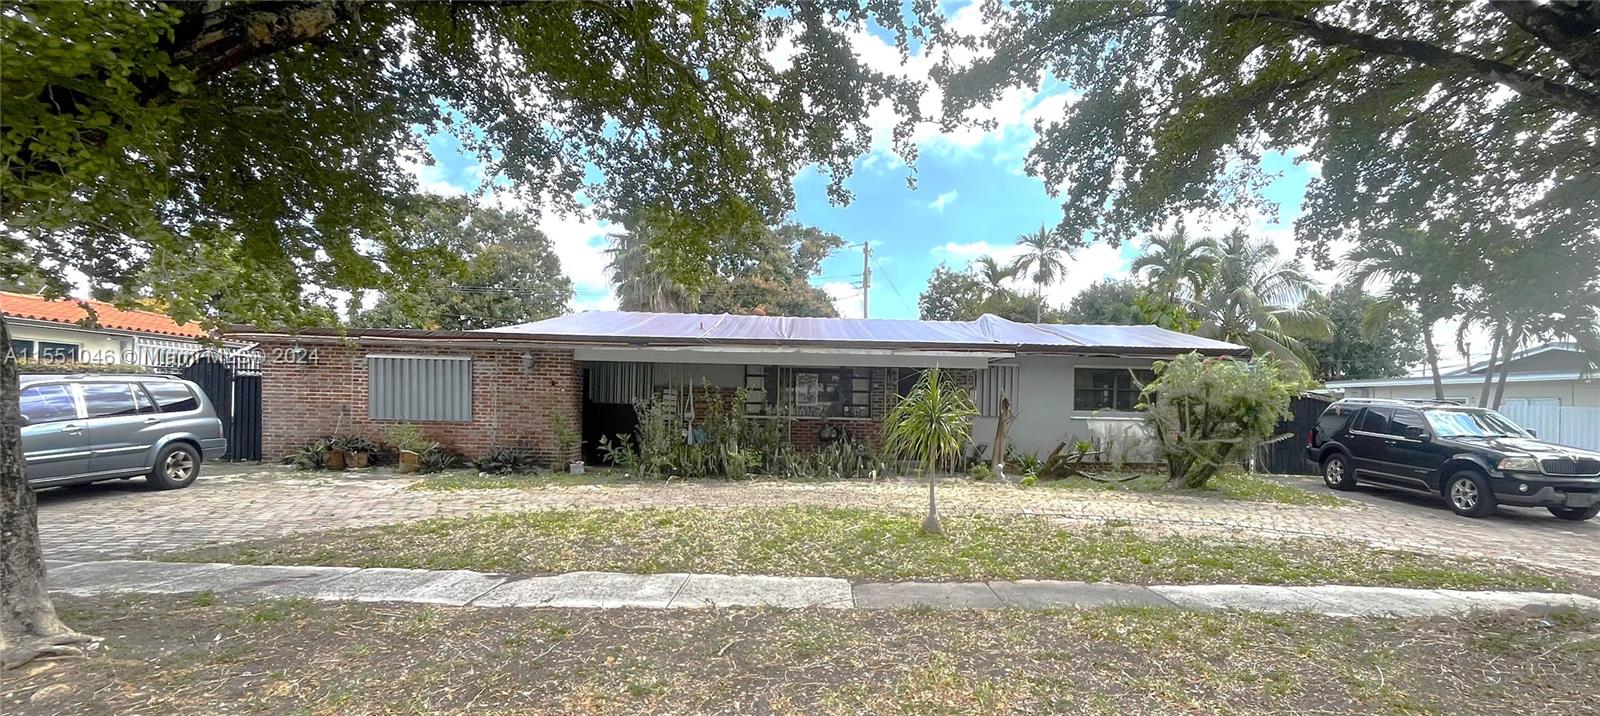 7035 W 10th Ave  For Sale A11551046, FL